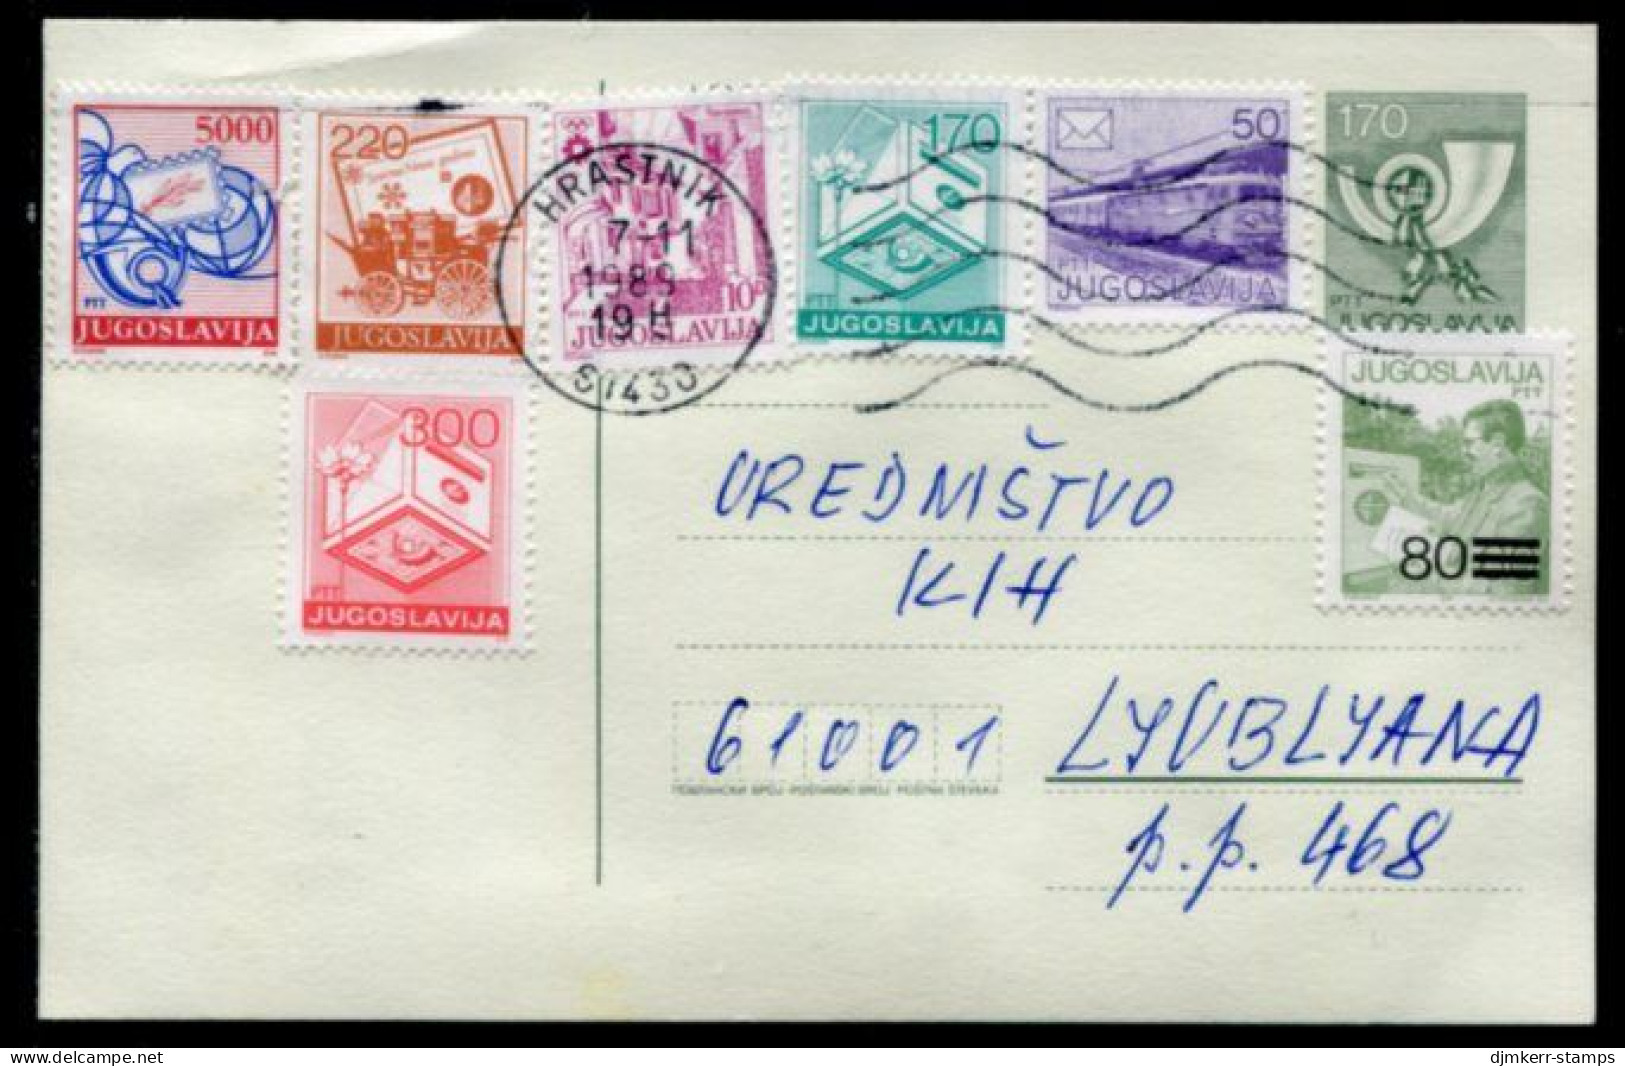 YUGOSLAVIA 1988 Posthorn 170 D. Stationery Card Used With Additional Franking.  Michel  P197 - Postal Stationery